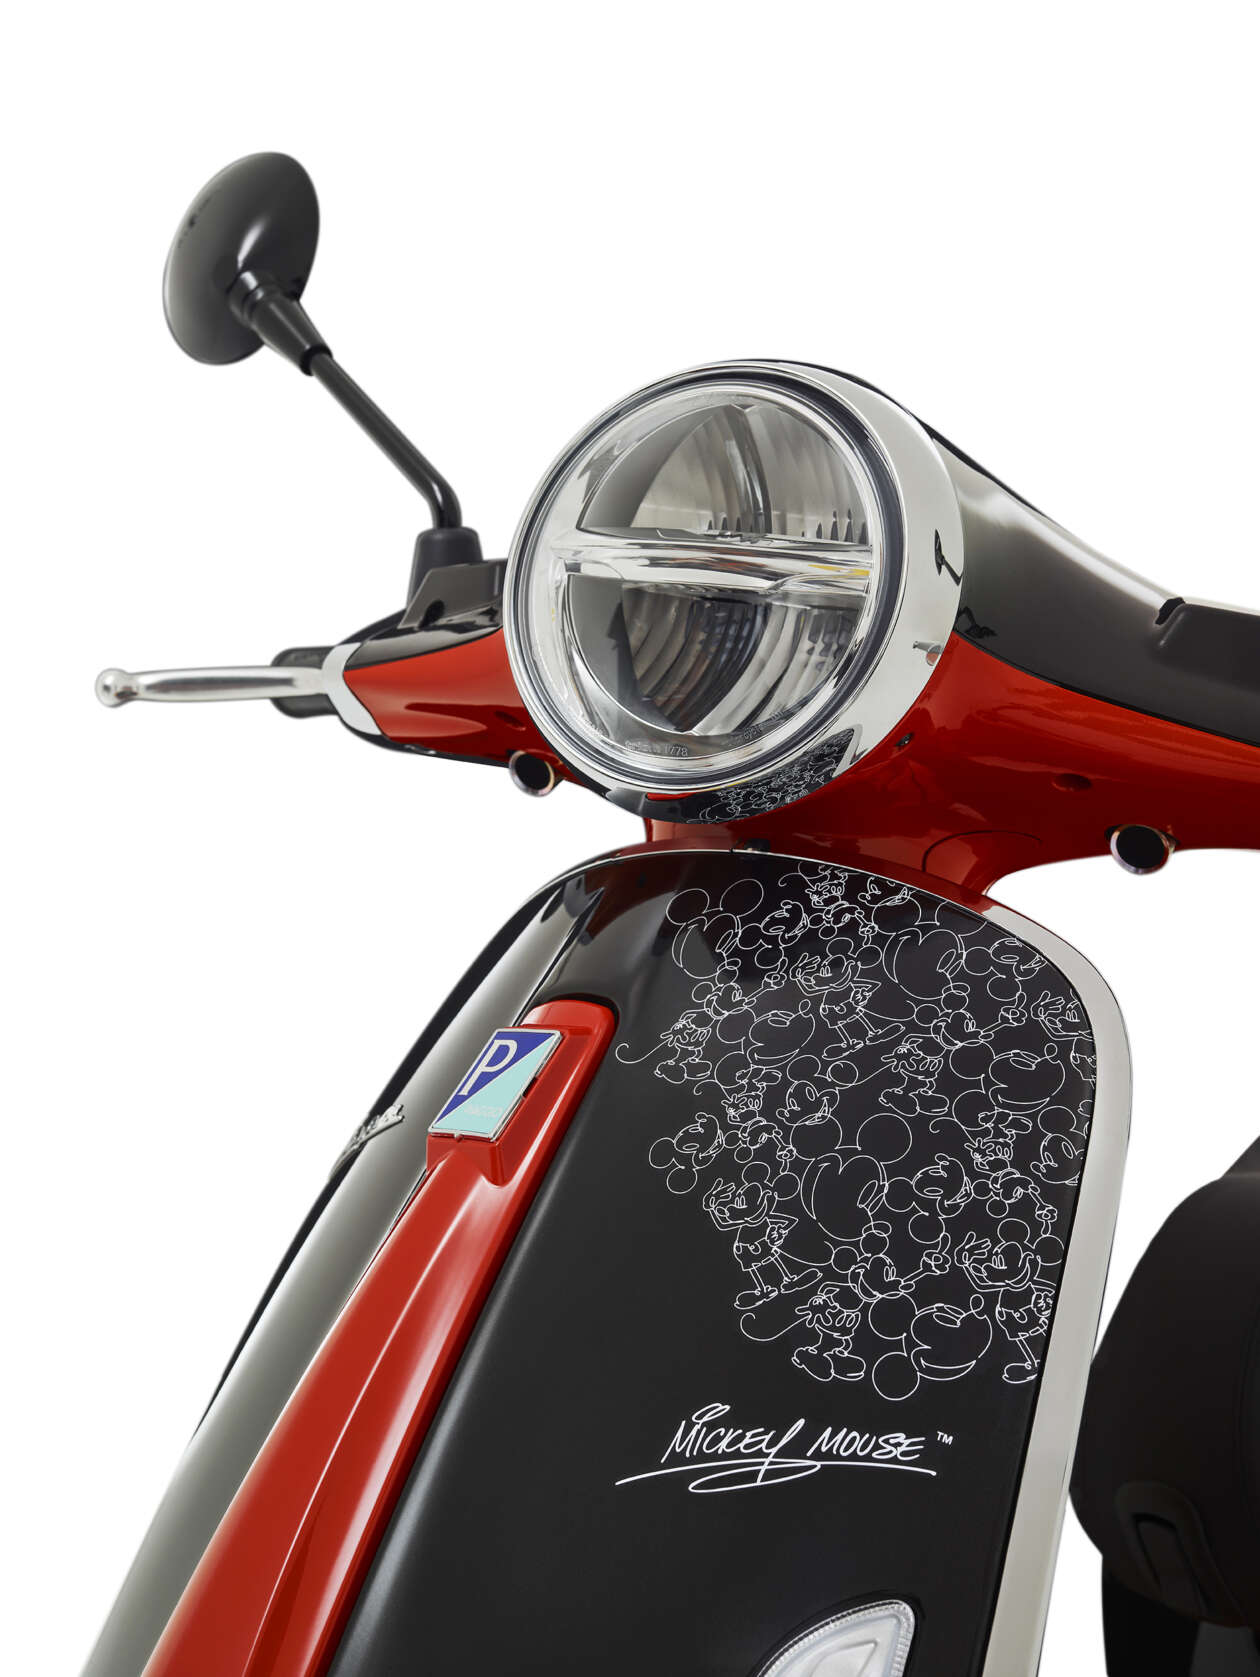 Vespa Mickey Mouse Edition Makes Official Debut - Looks Eye-Catching! - left